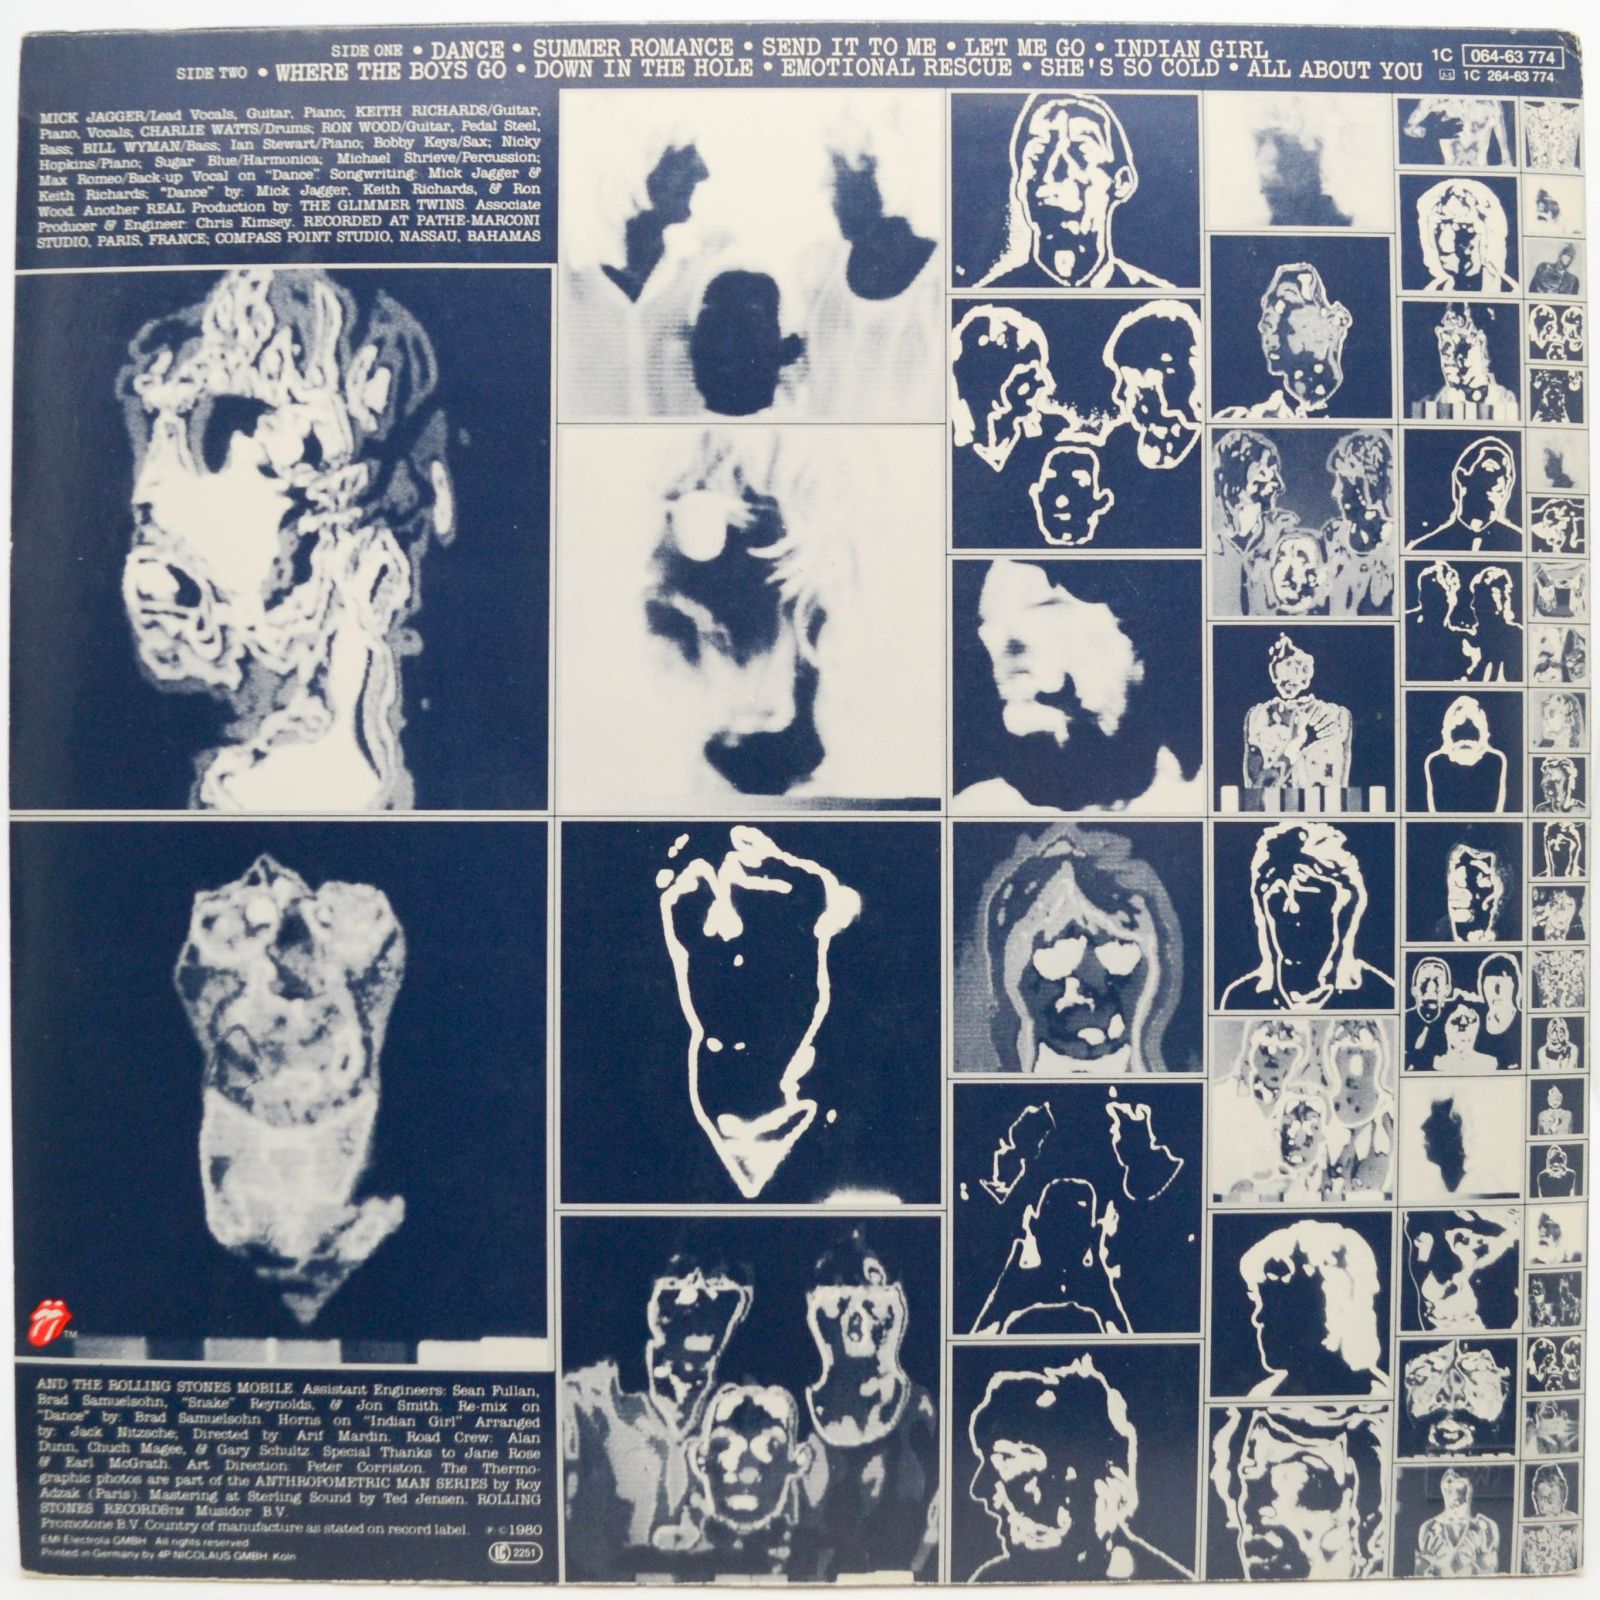 Rolling Stones — Emotional Rescue (poster), 1980